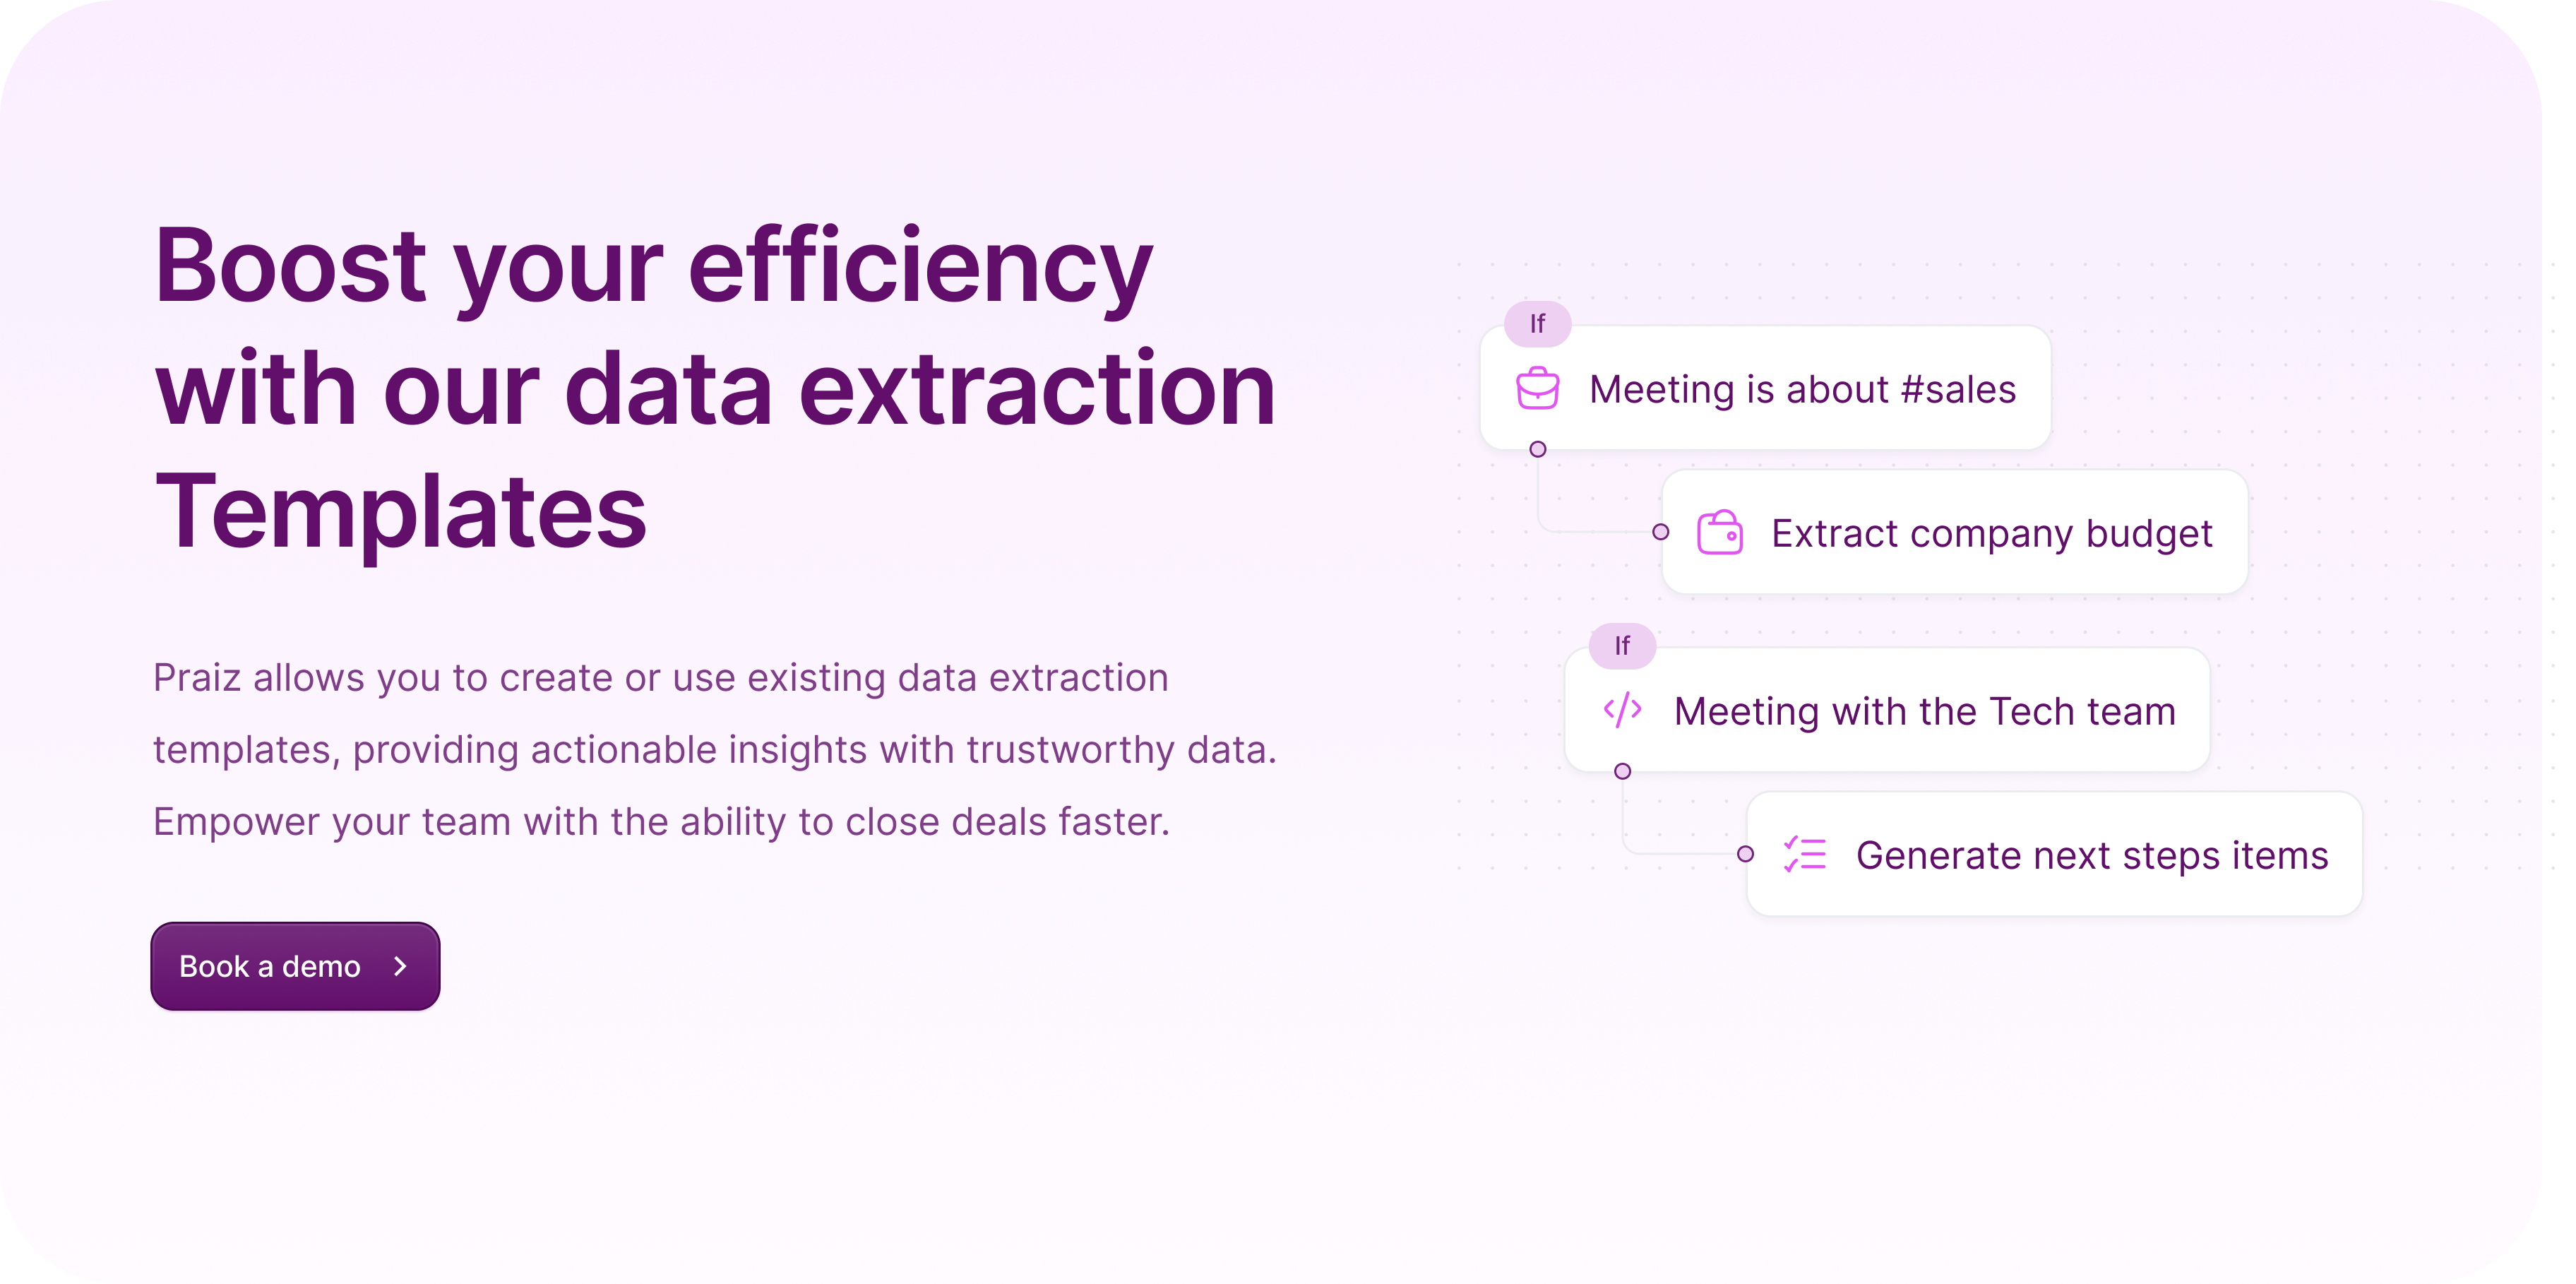 Praiz allows you to create or use existing data extraction templates, providing actionable insights with trustworthy data. Empower your team with the ability to close deals faster.